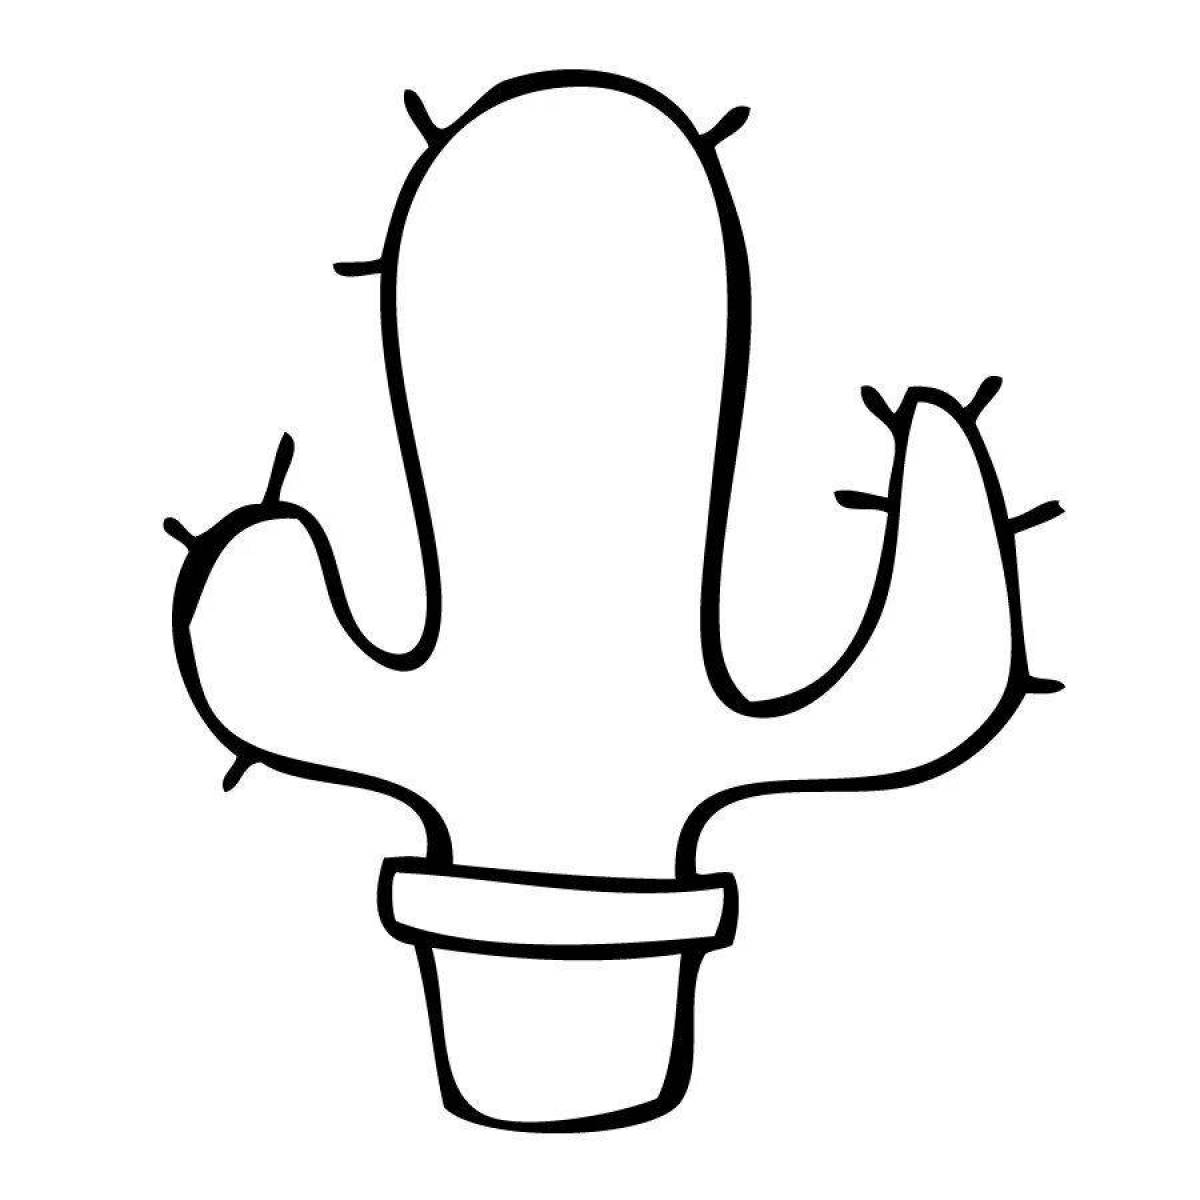 Great cactus coloring book for kids